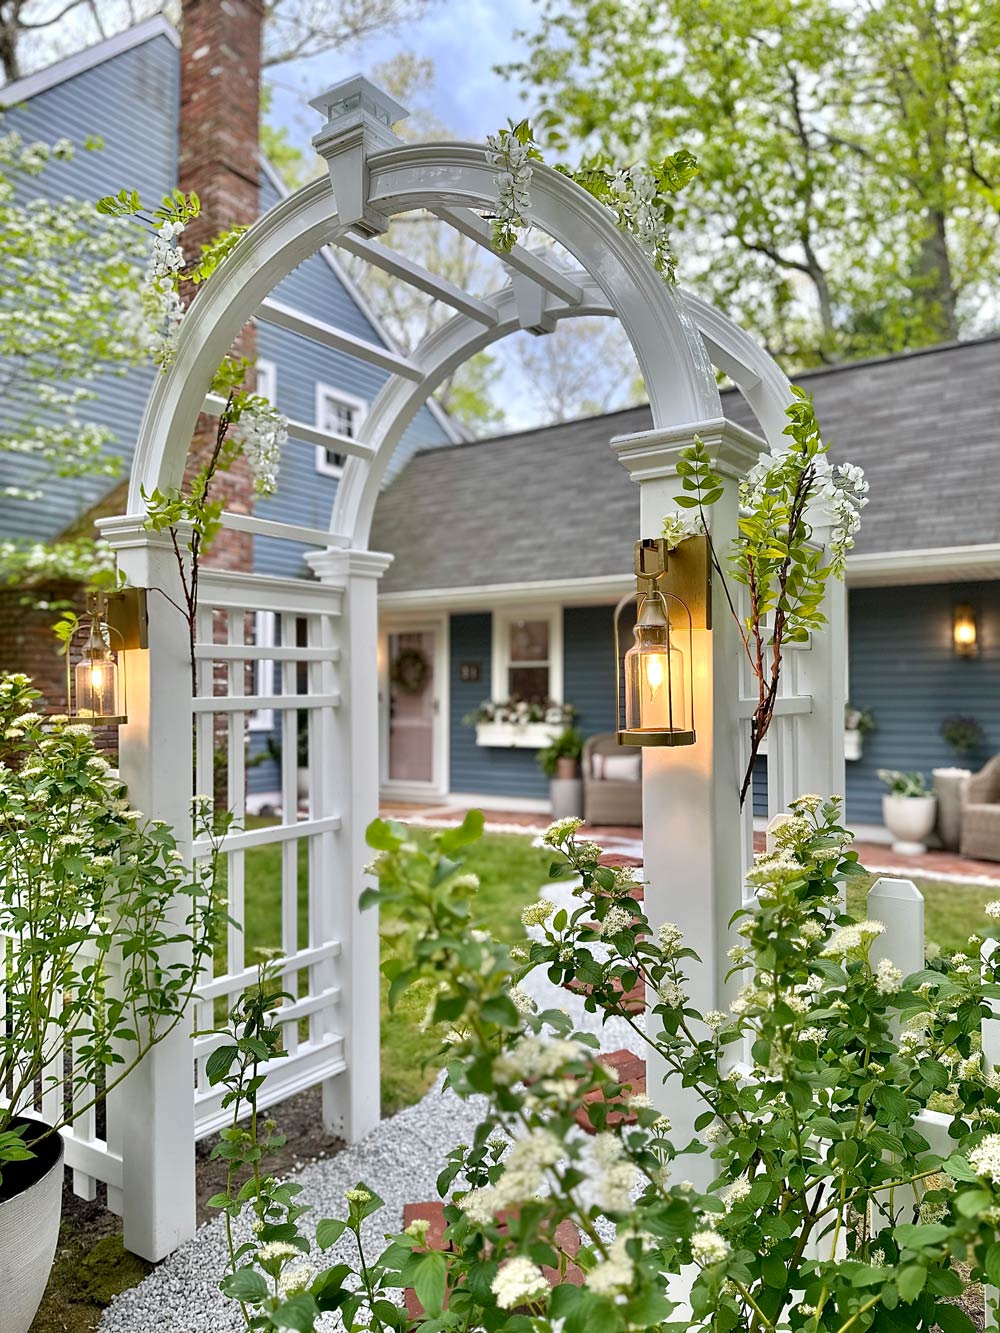 White arbor archway into front yard with vining plants growing.  